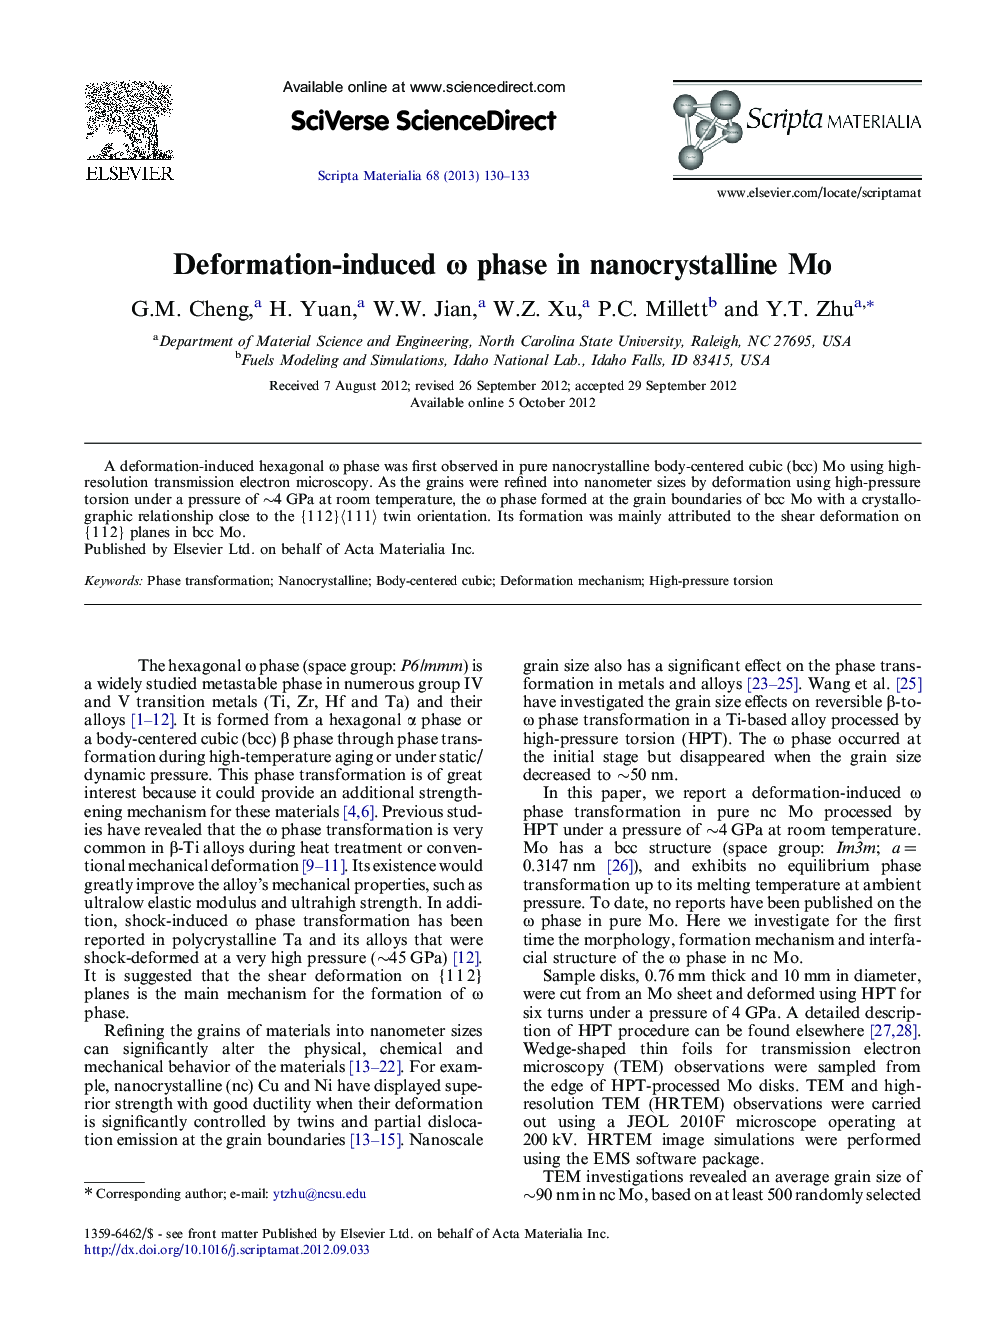 Deformation-induced ω phase in nanocrystalline Mo